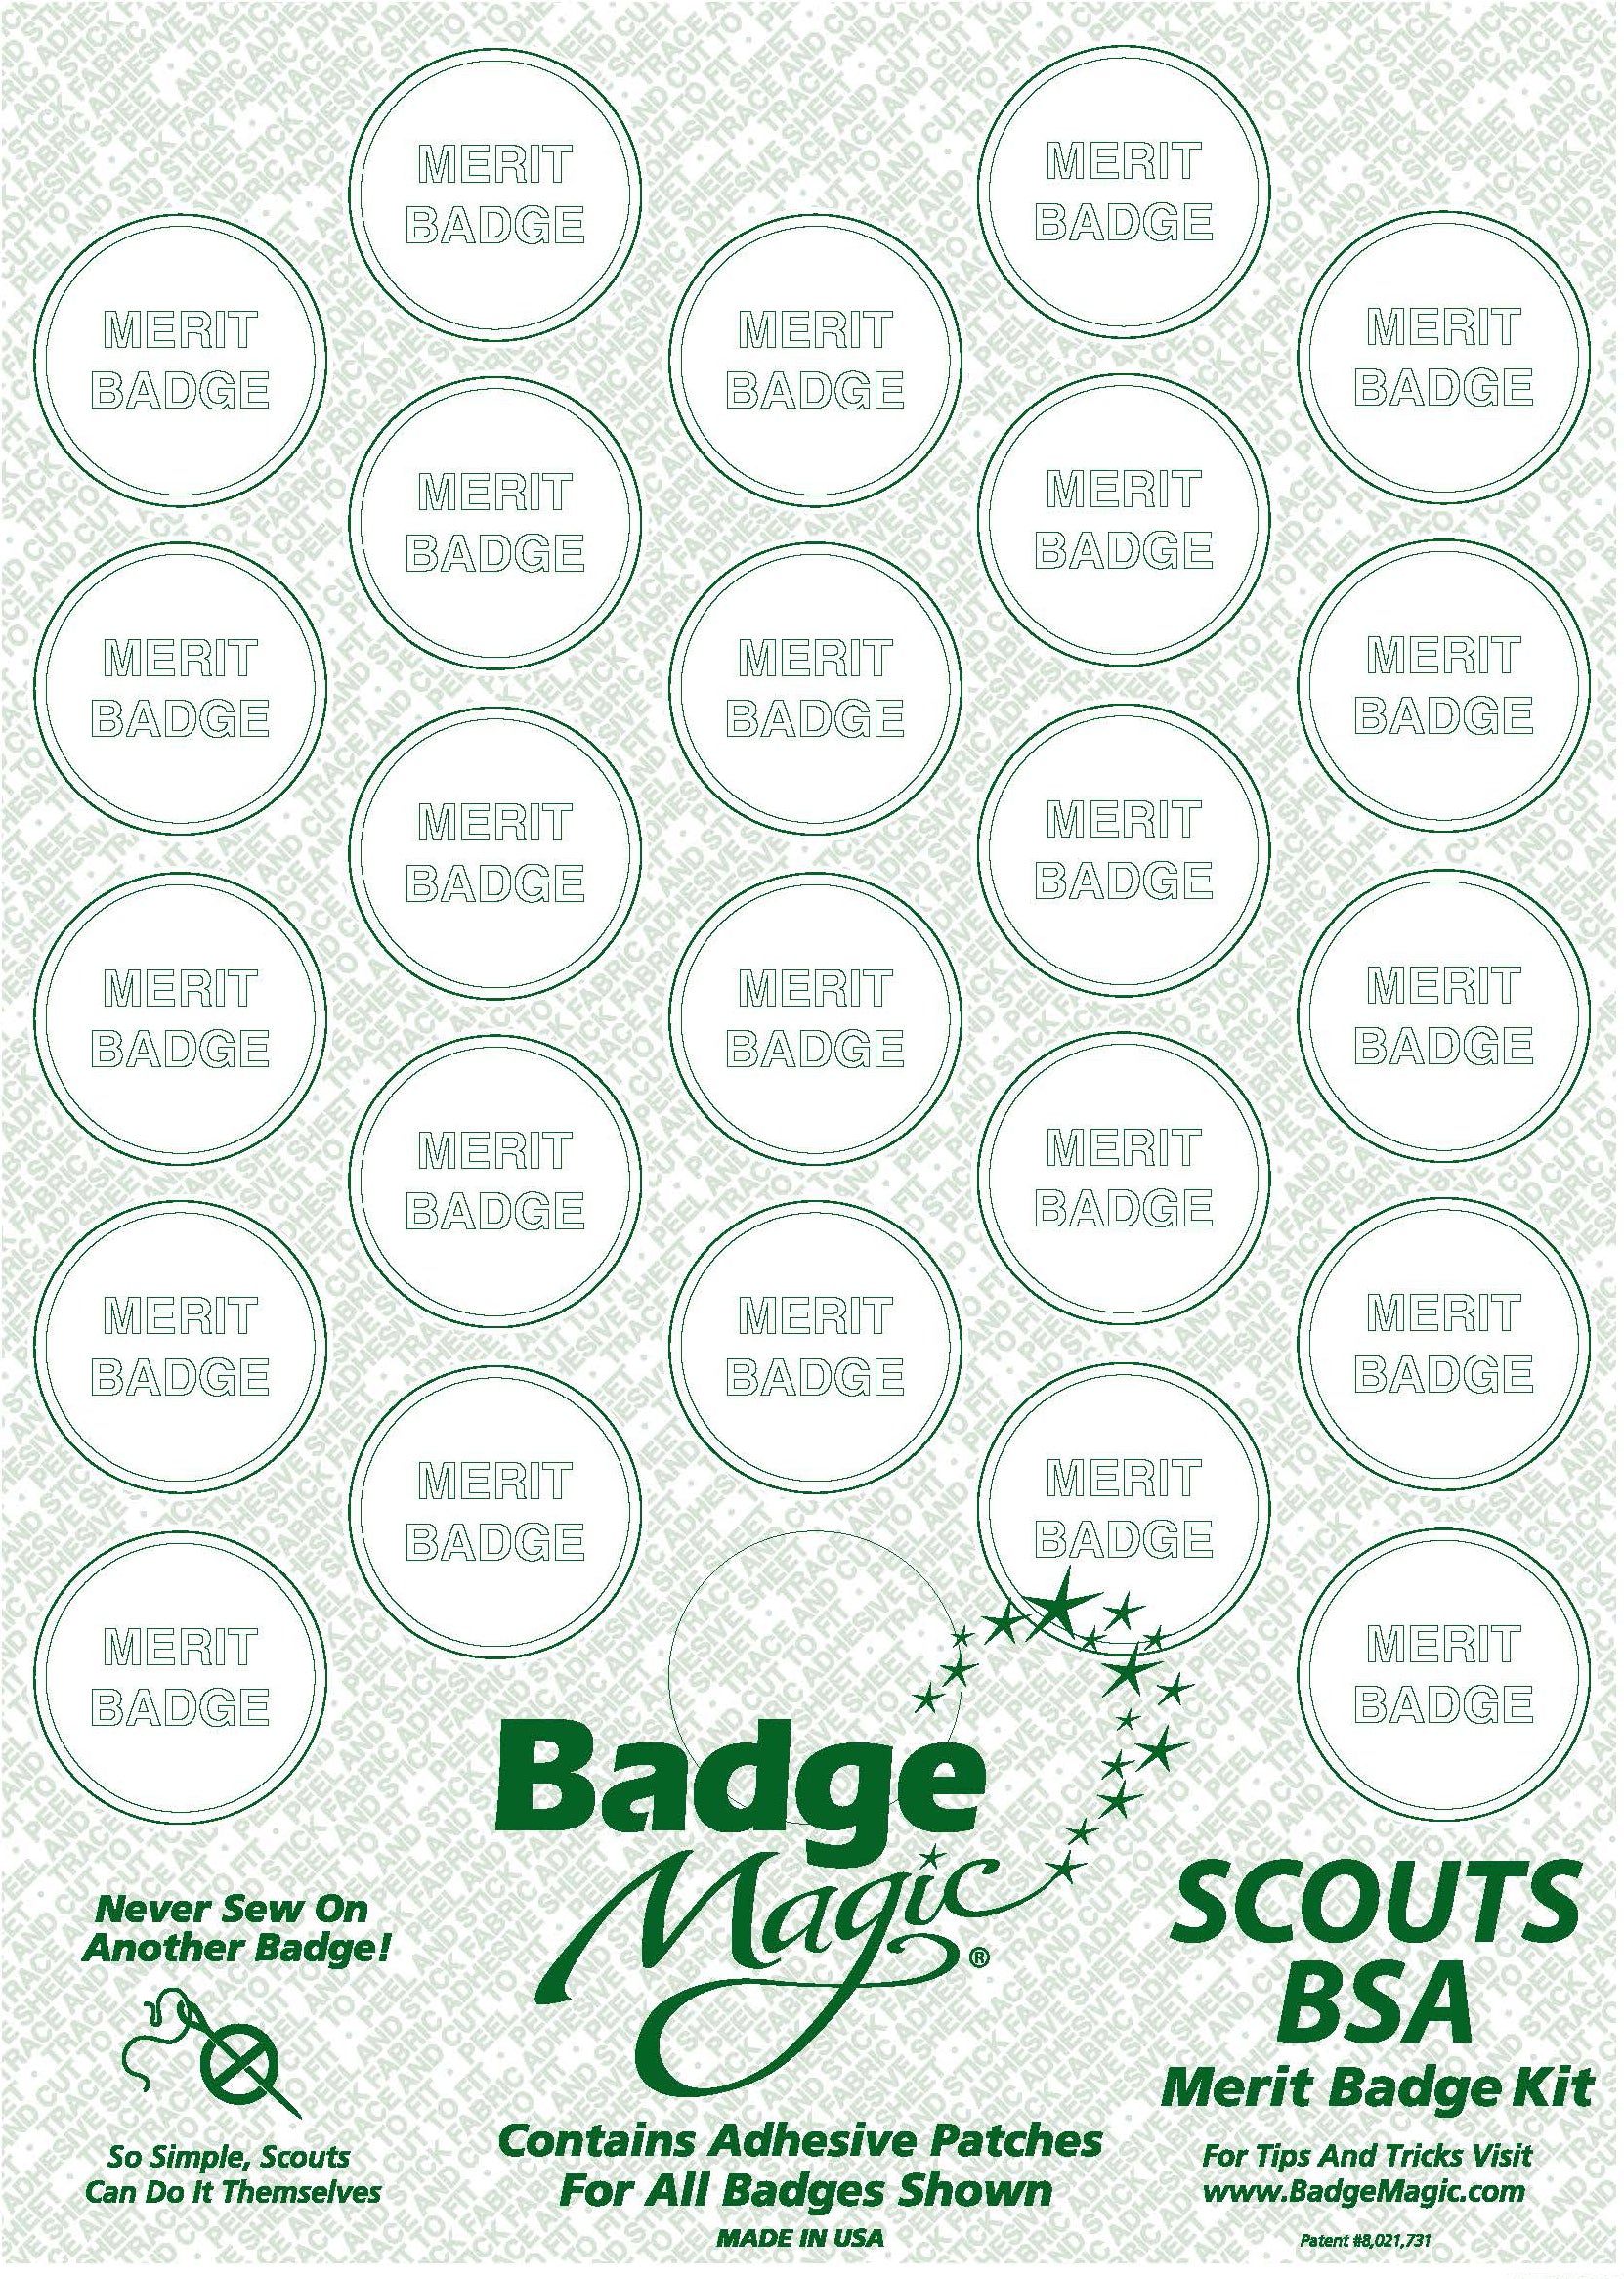 Badge Magic | Cut-to-Fit Freestyle Badge Kit, Patch Adhesive Kit | Pack of 4